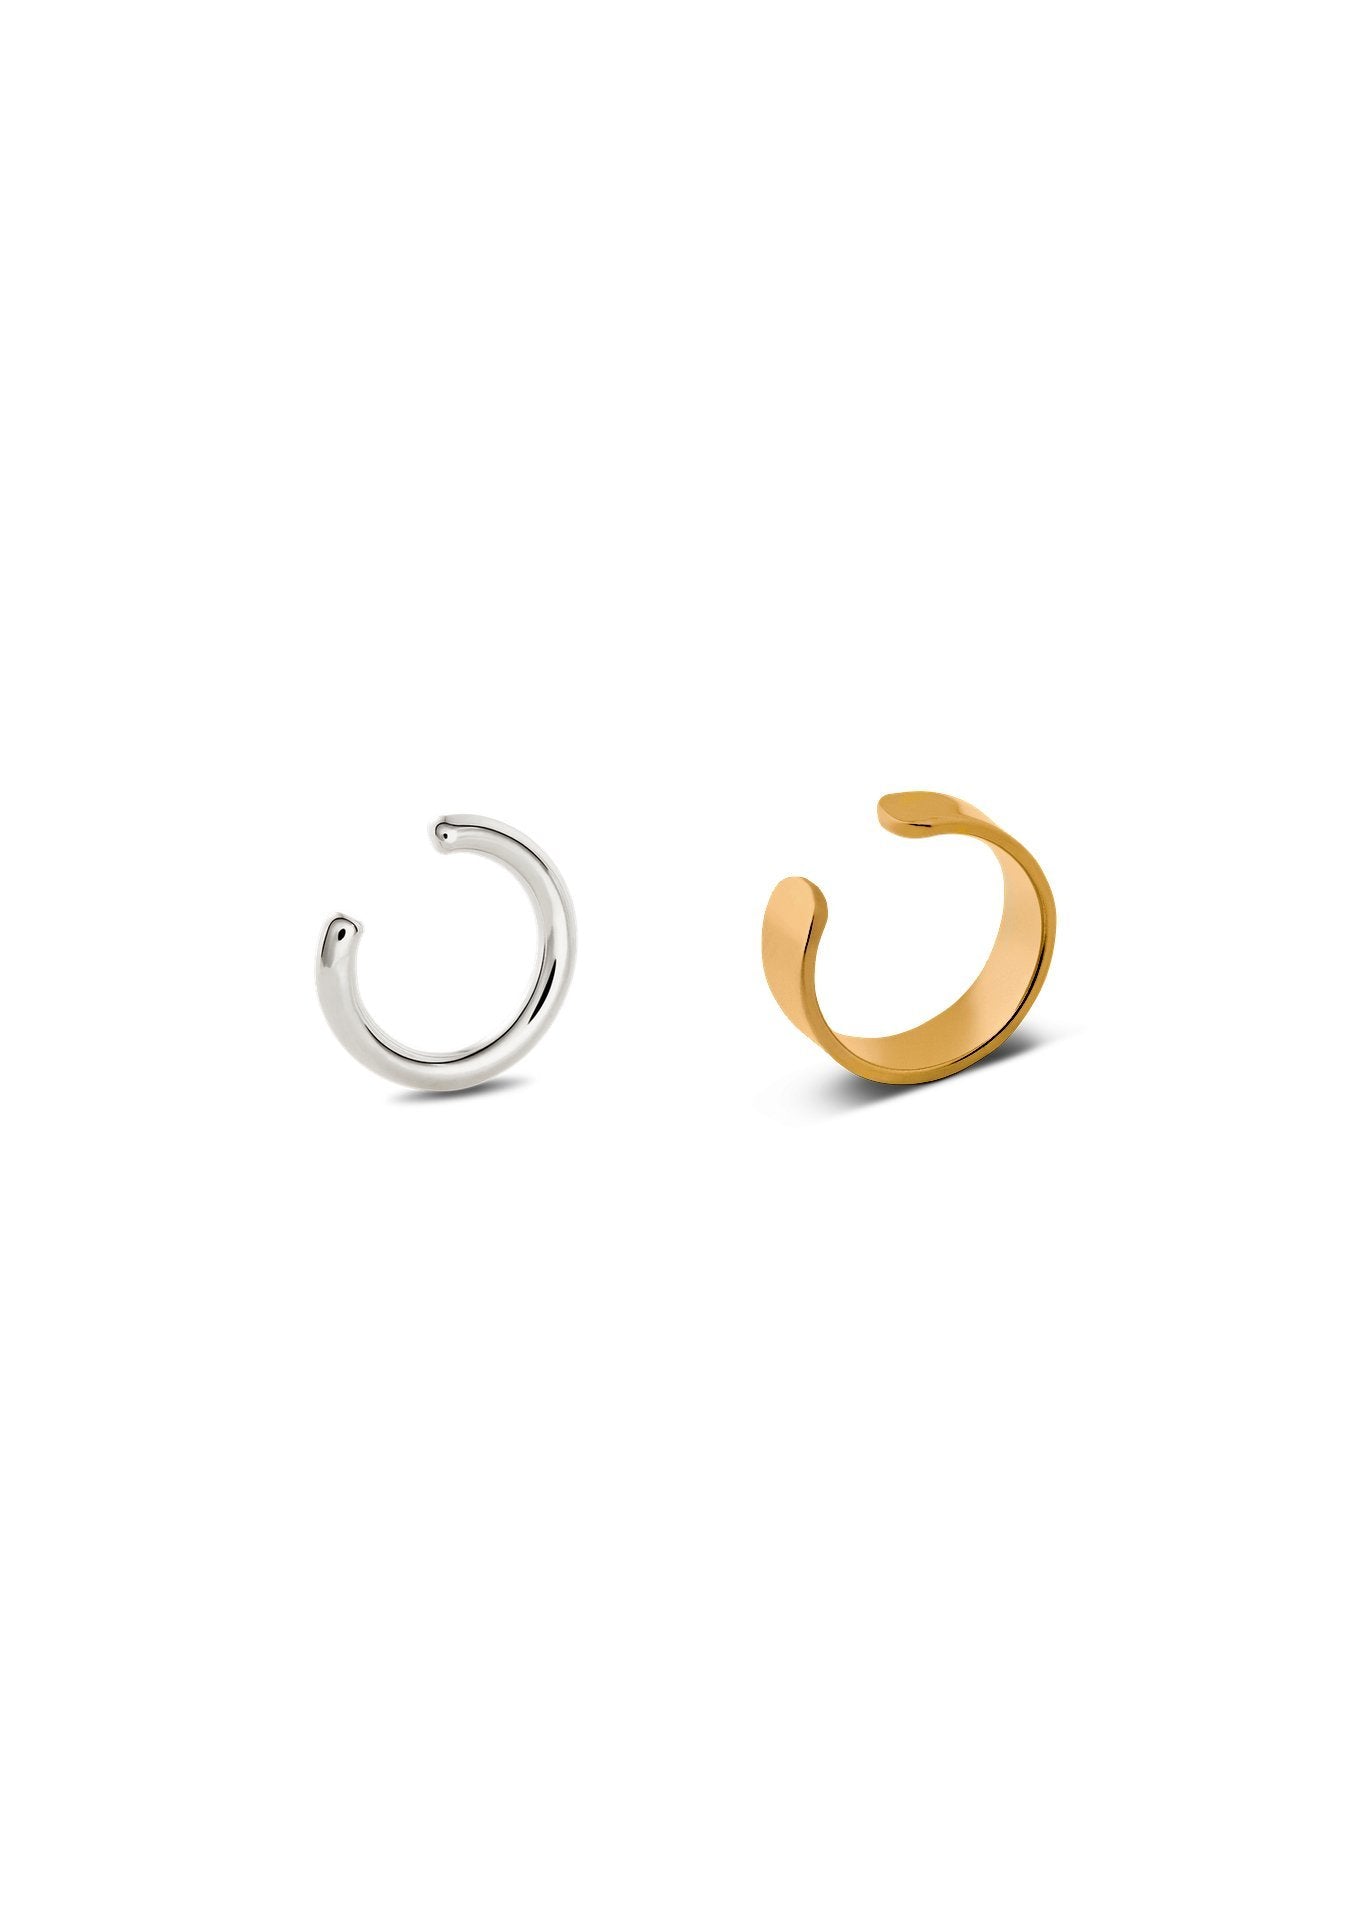 NO MORE accessories Ear Cuffs Duo in gold plated sterling silver